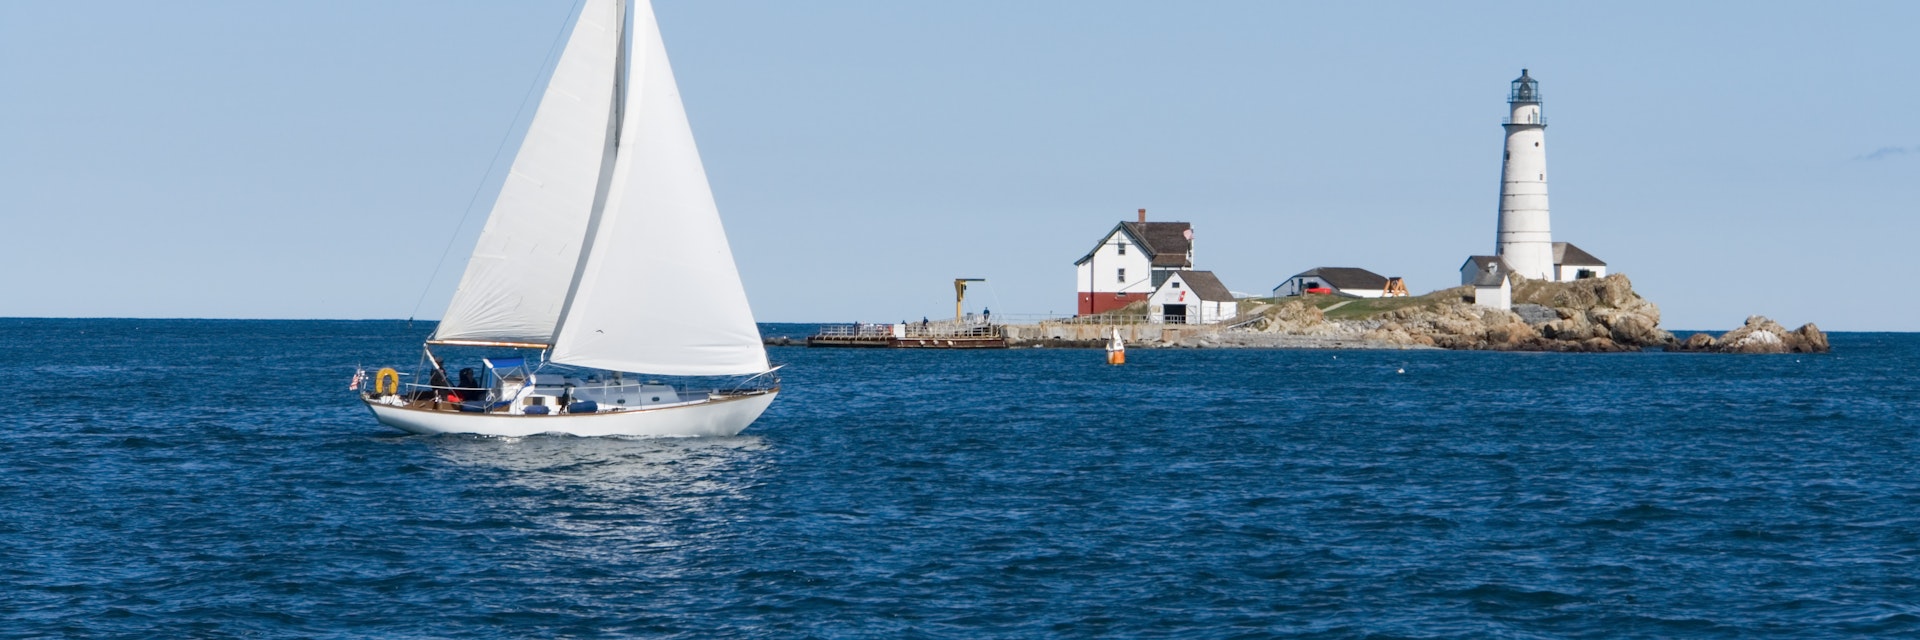 A sailboat crosses in front of Boston Light; Shutterstock ID 9570529; Your name (First / Last): Trisha Ping; GL account no.: 65050; Netsuite department name: Online Editorial; Full Product or Project name including edition: Trisha Ping/65050/Online Editorial/New England